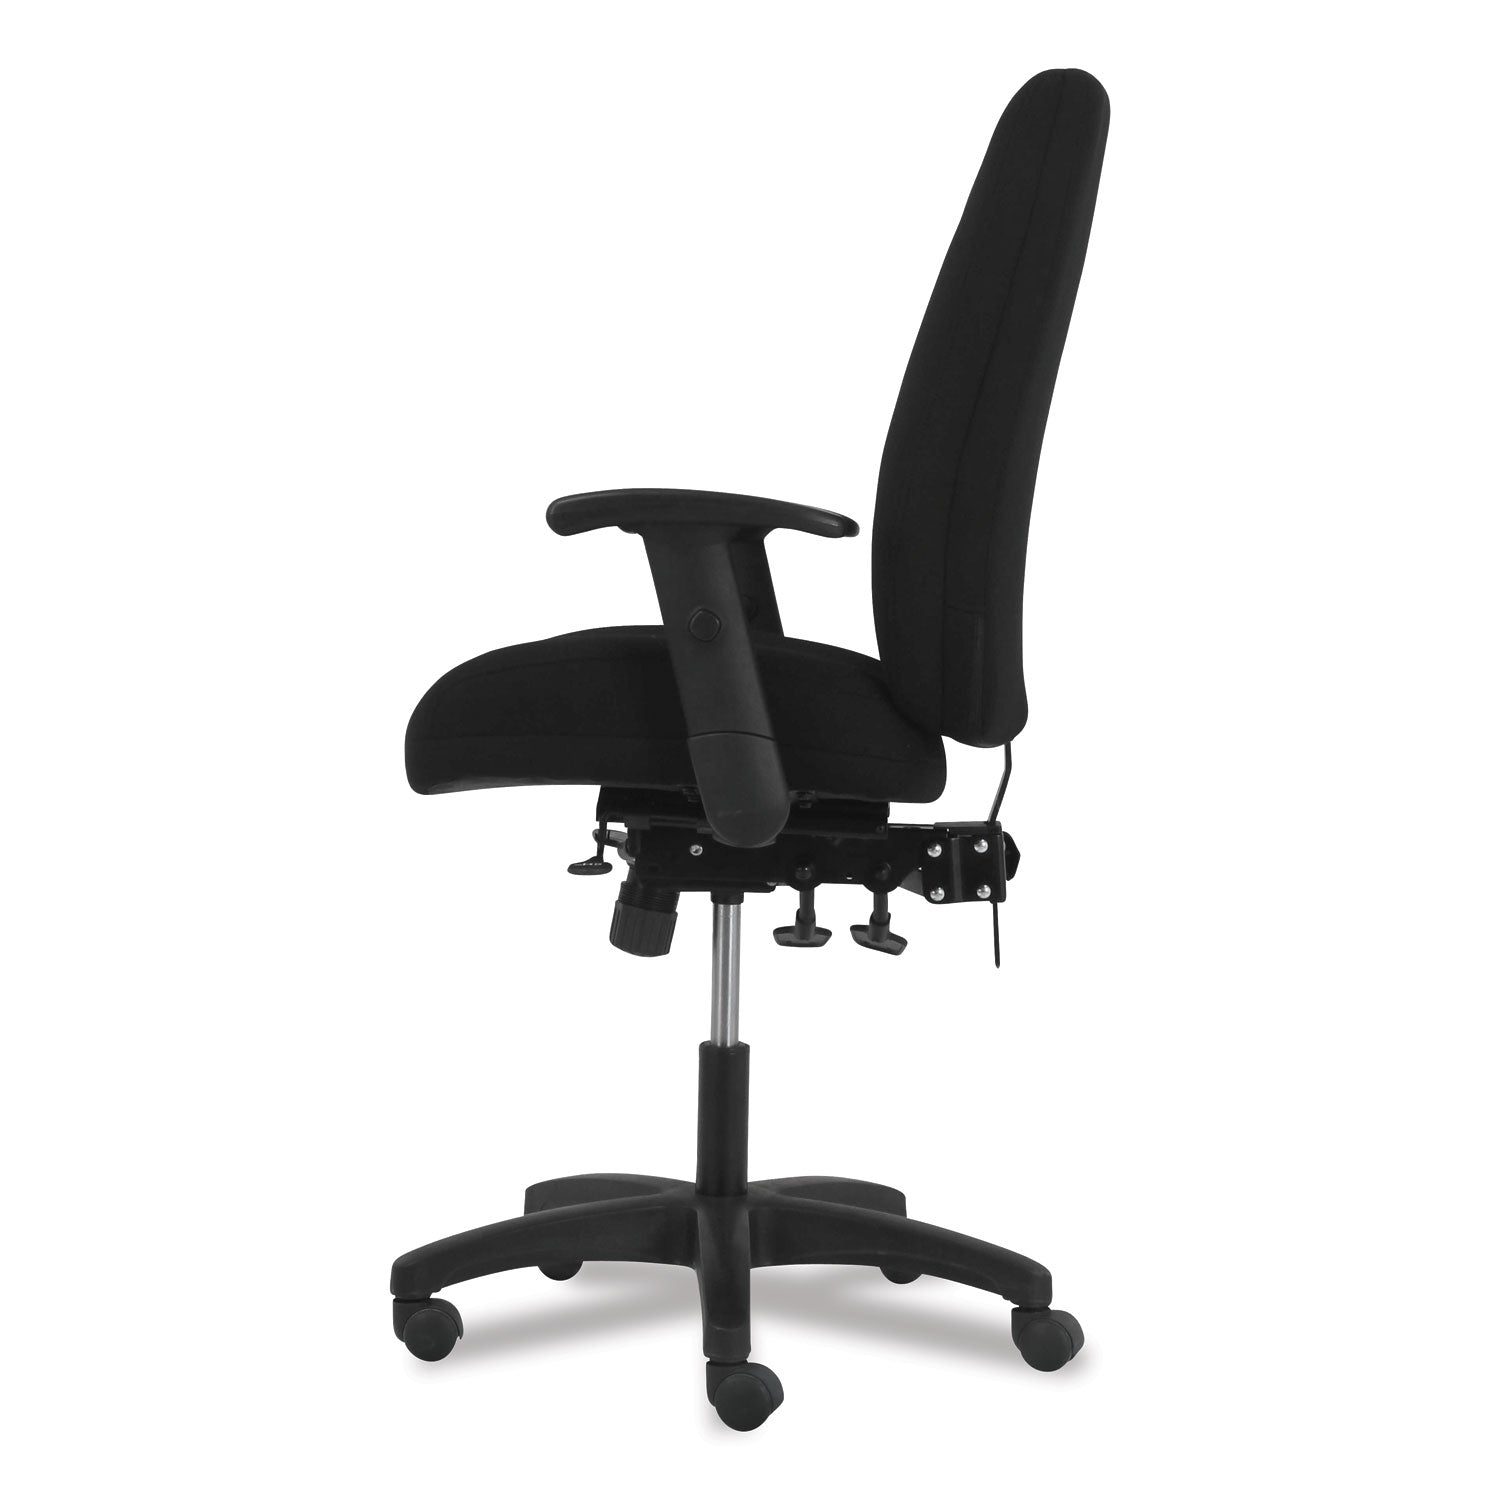 network-high-back-chair-supports-up-to-250-lb-183-to-228-seat-height-black_honvl283a2va10t - 4